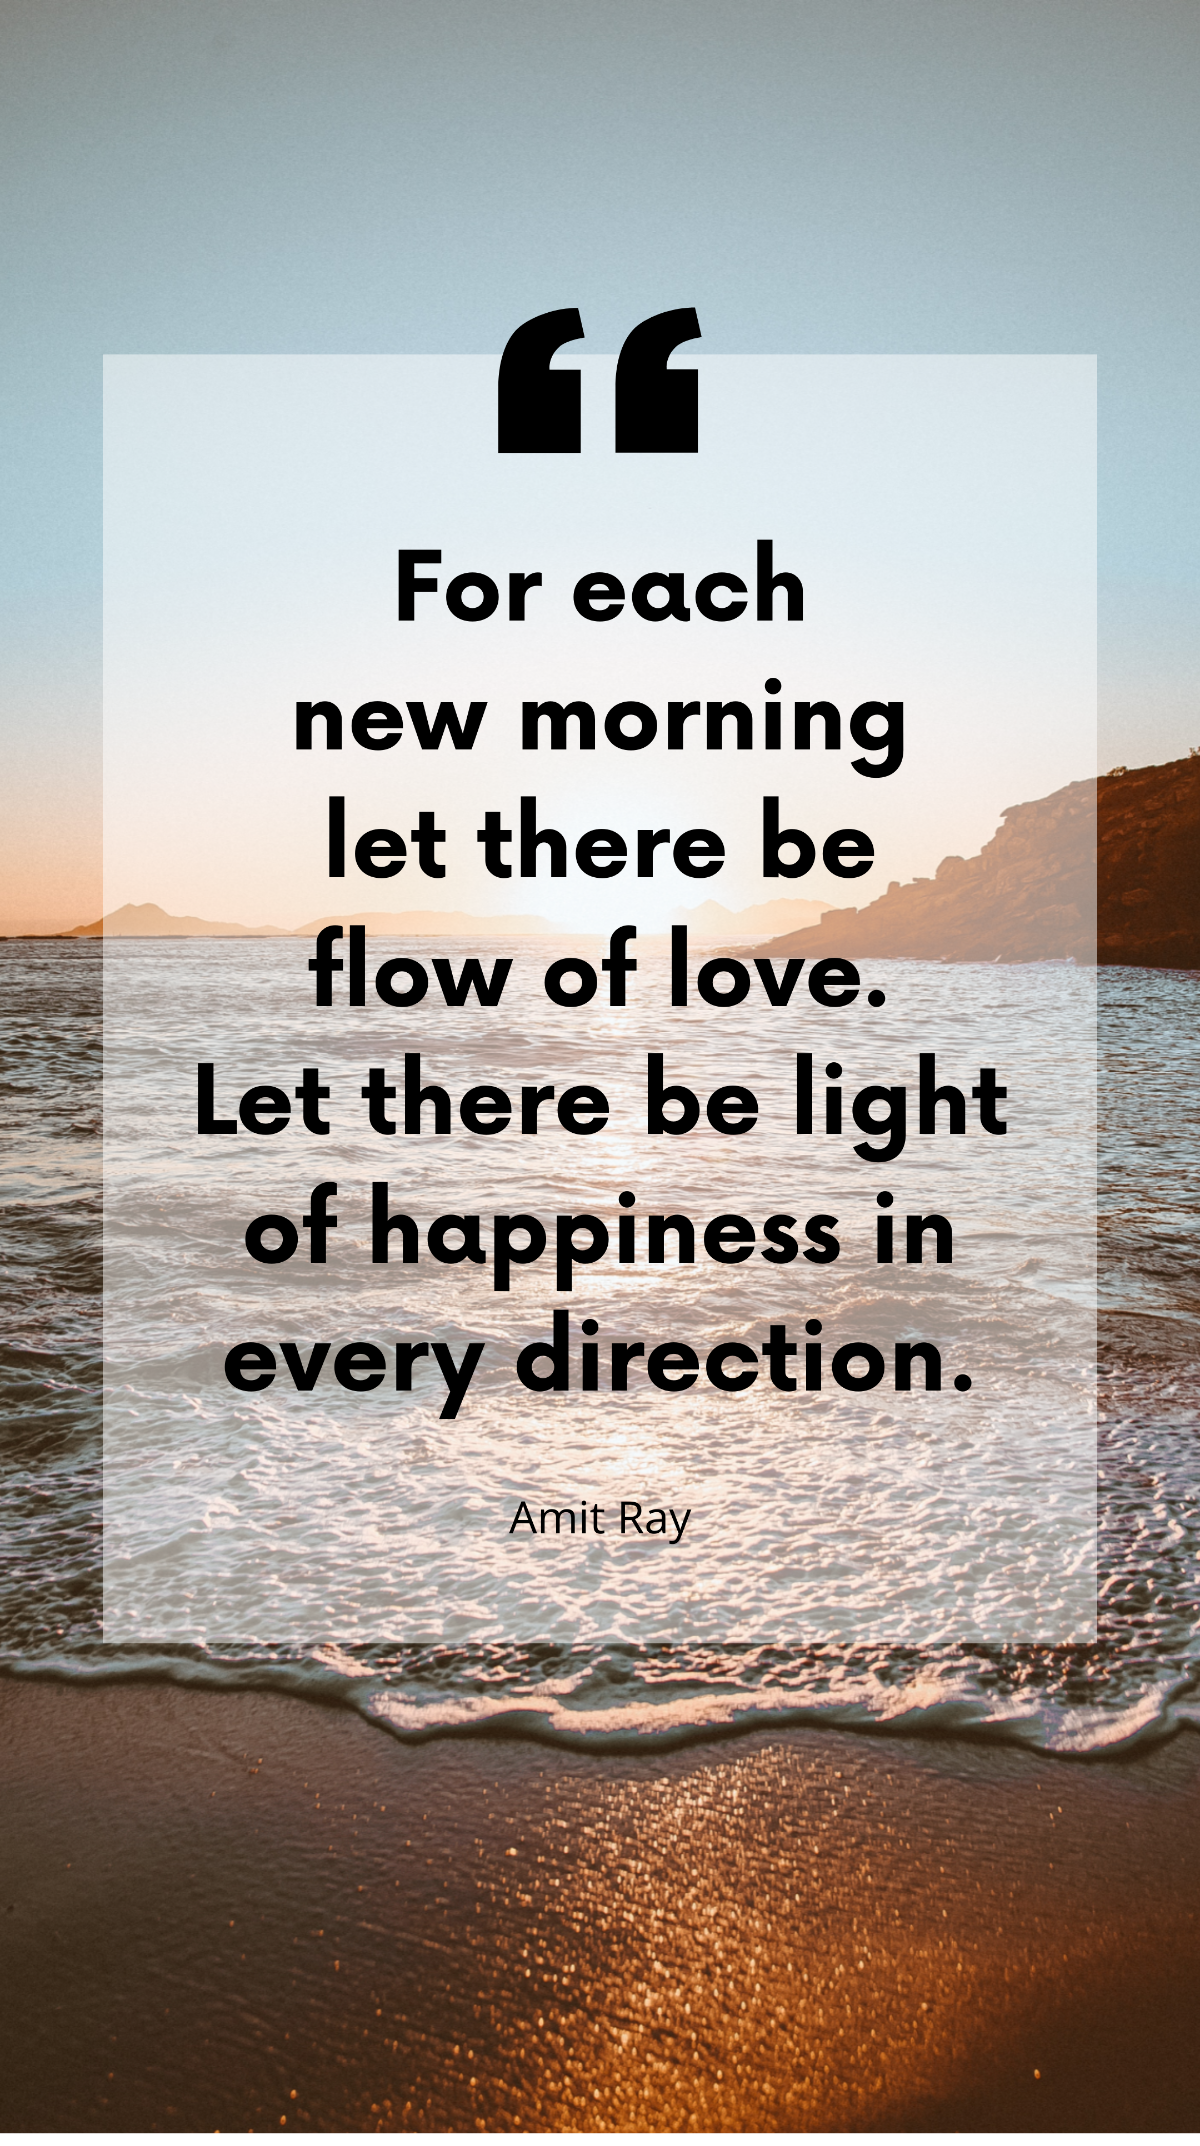 Amit Ray - For each new morning let there be flow of love. Let there be light of happiness in every direction. Template